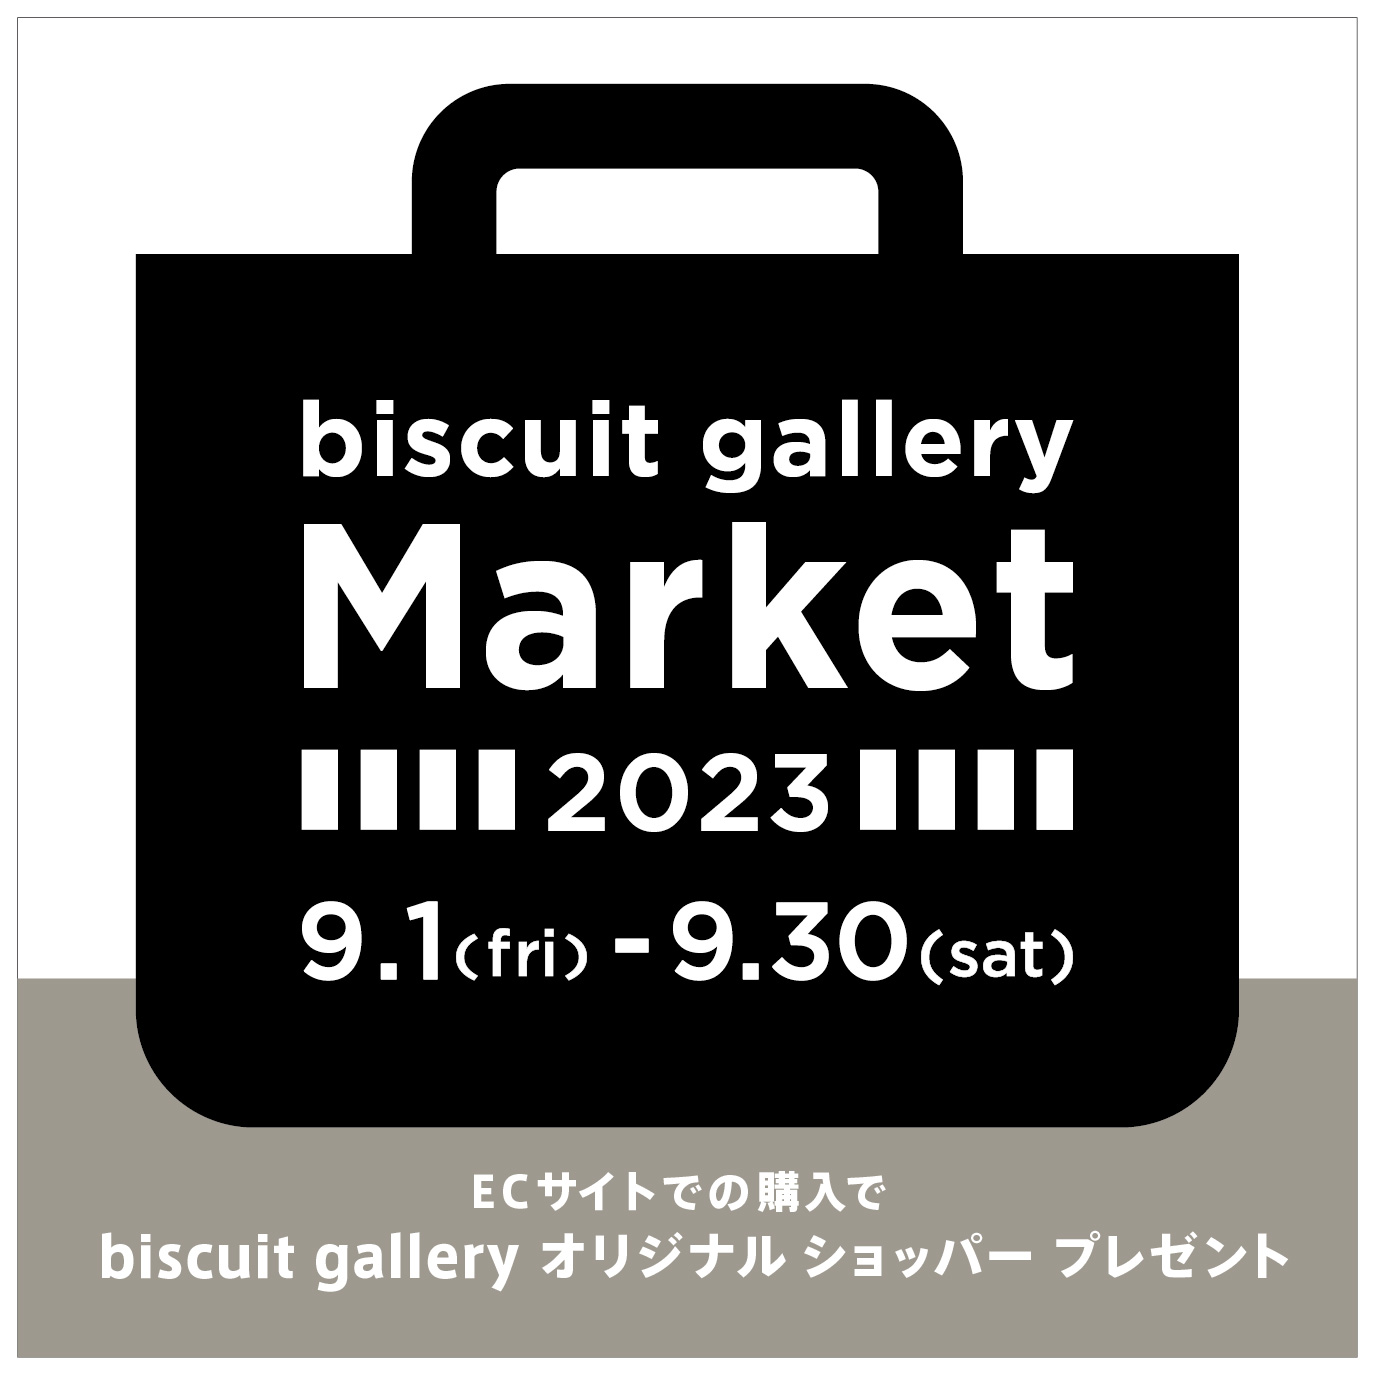 「biscuit gallery online shop」本格オープンと特別キャンペーンのお知らせ / Announcement of full-scale opening and special campaign